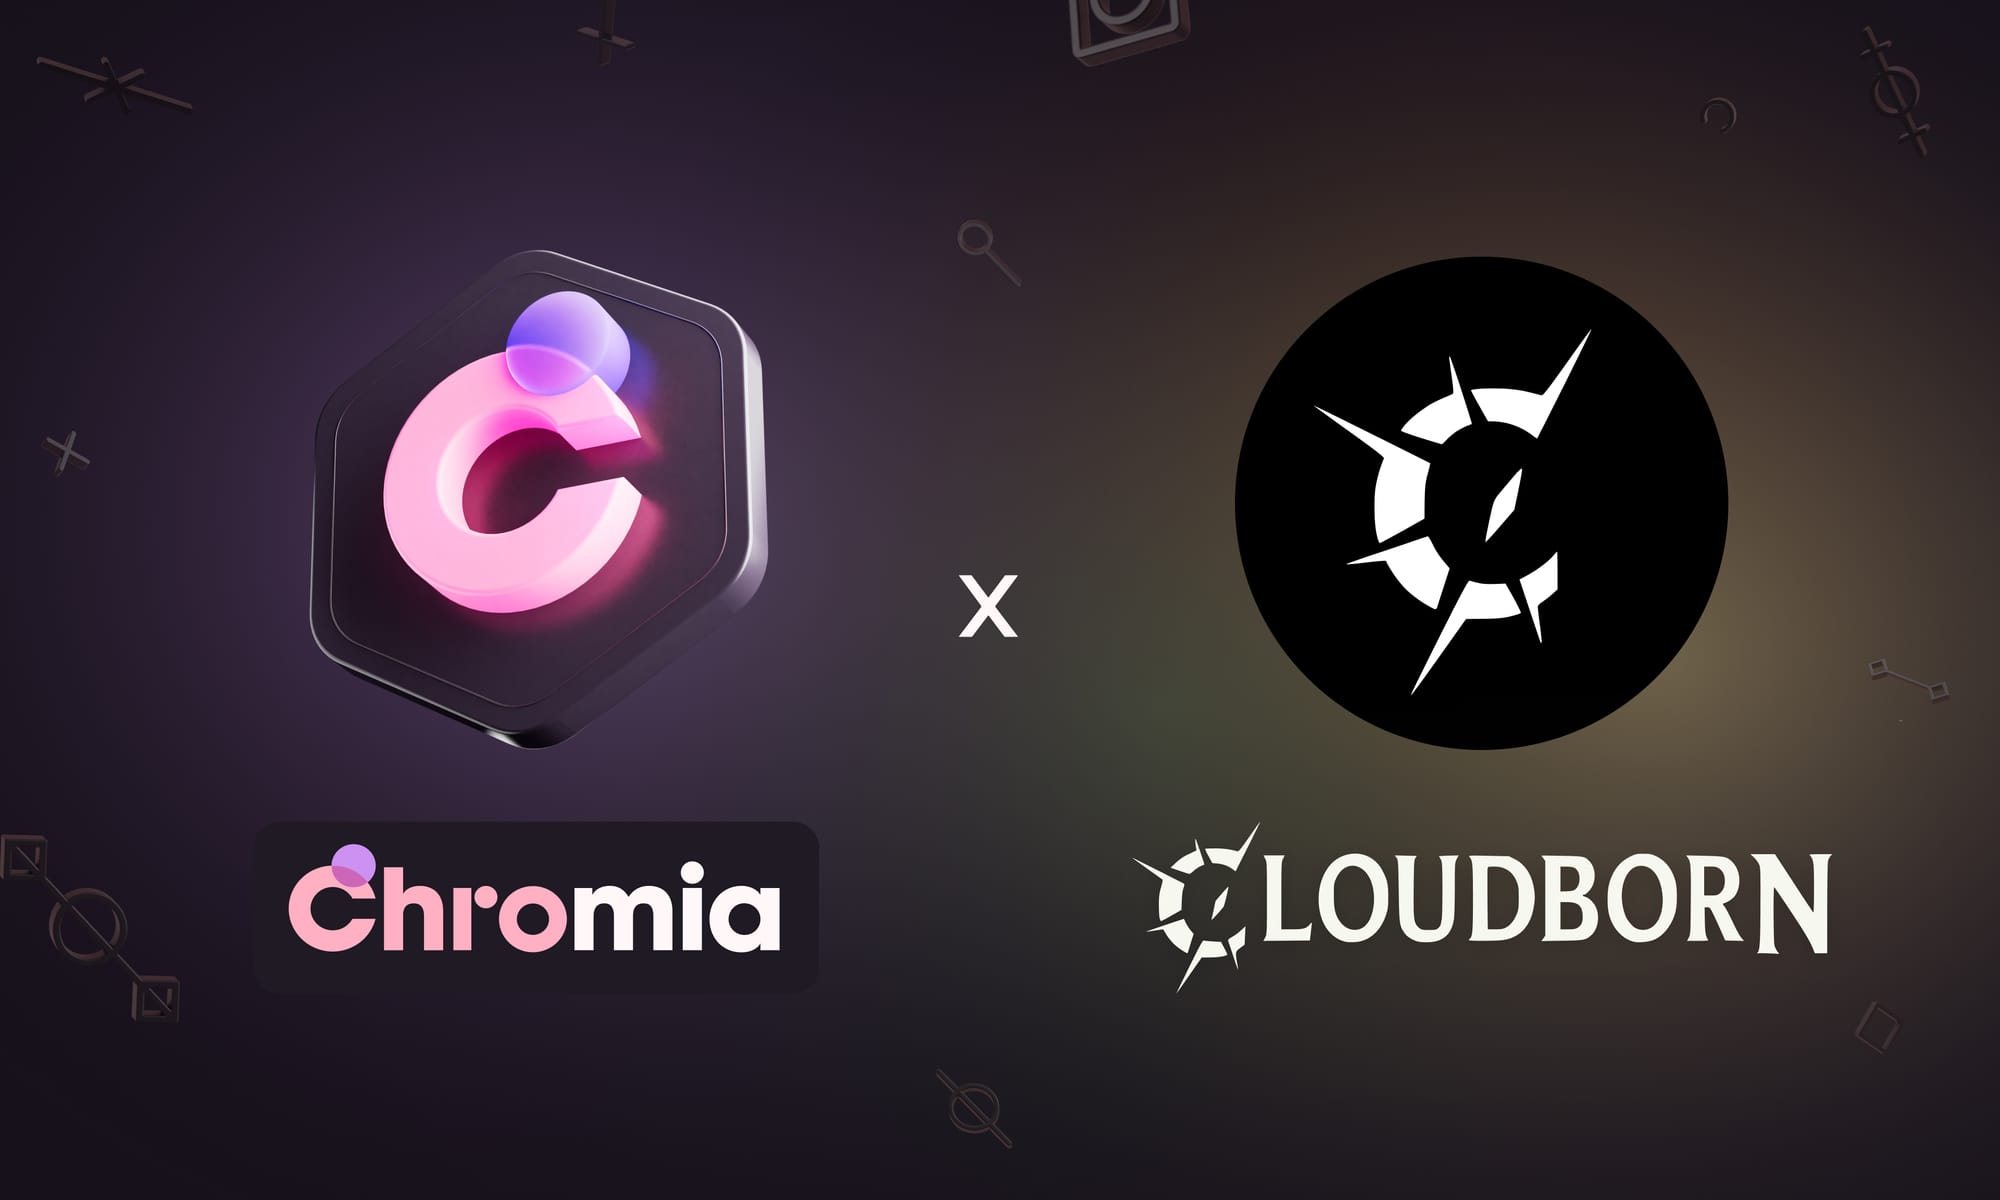 Cloudborn Joins the Chromia Gaming Ecosystem